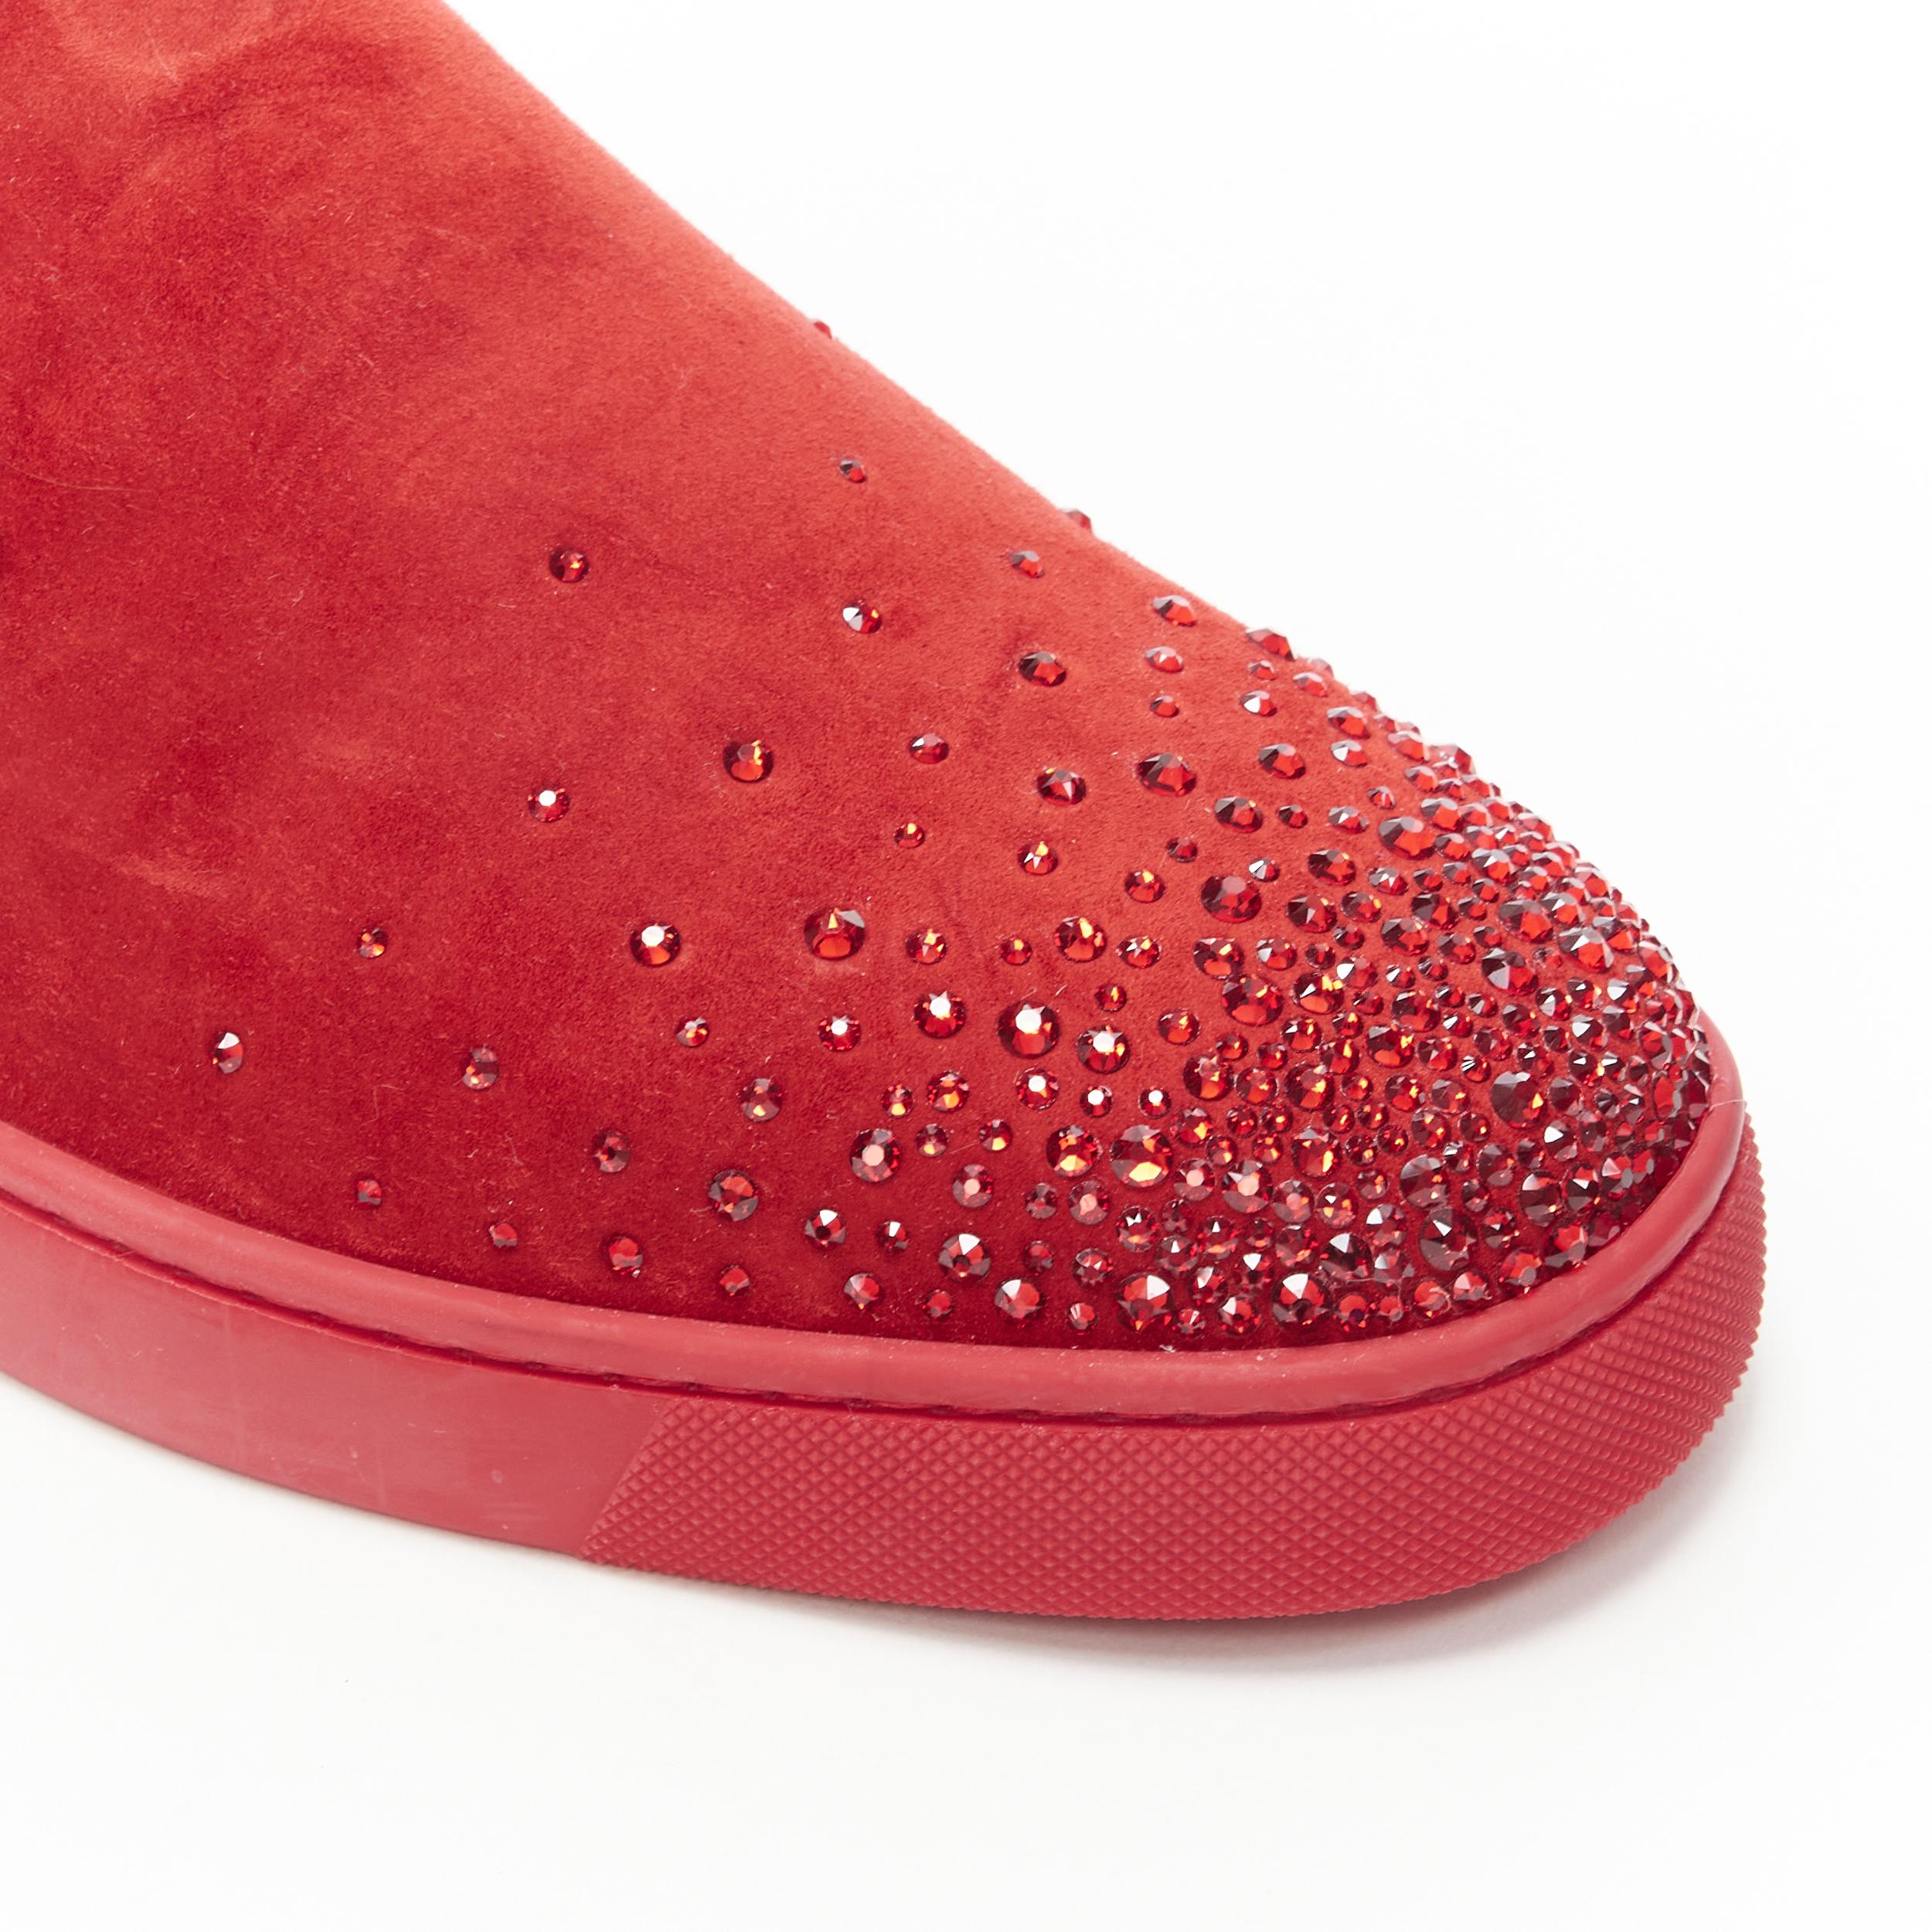 new CHRISTIAN LOUBOUTIN Sailor Boat red suede degrade strass low sneaker EU42 
Reference: TGAS/B00249 
Brand: Christian Louboutin 
Designer: Christian Louboutin 
Model: Sailor Boat 
Material: Suede 
Color: Red 
Pattern: Solid 
Closure: Slip on 
Made